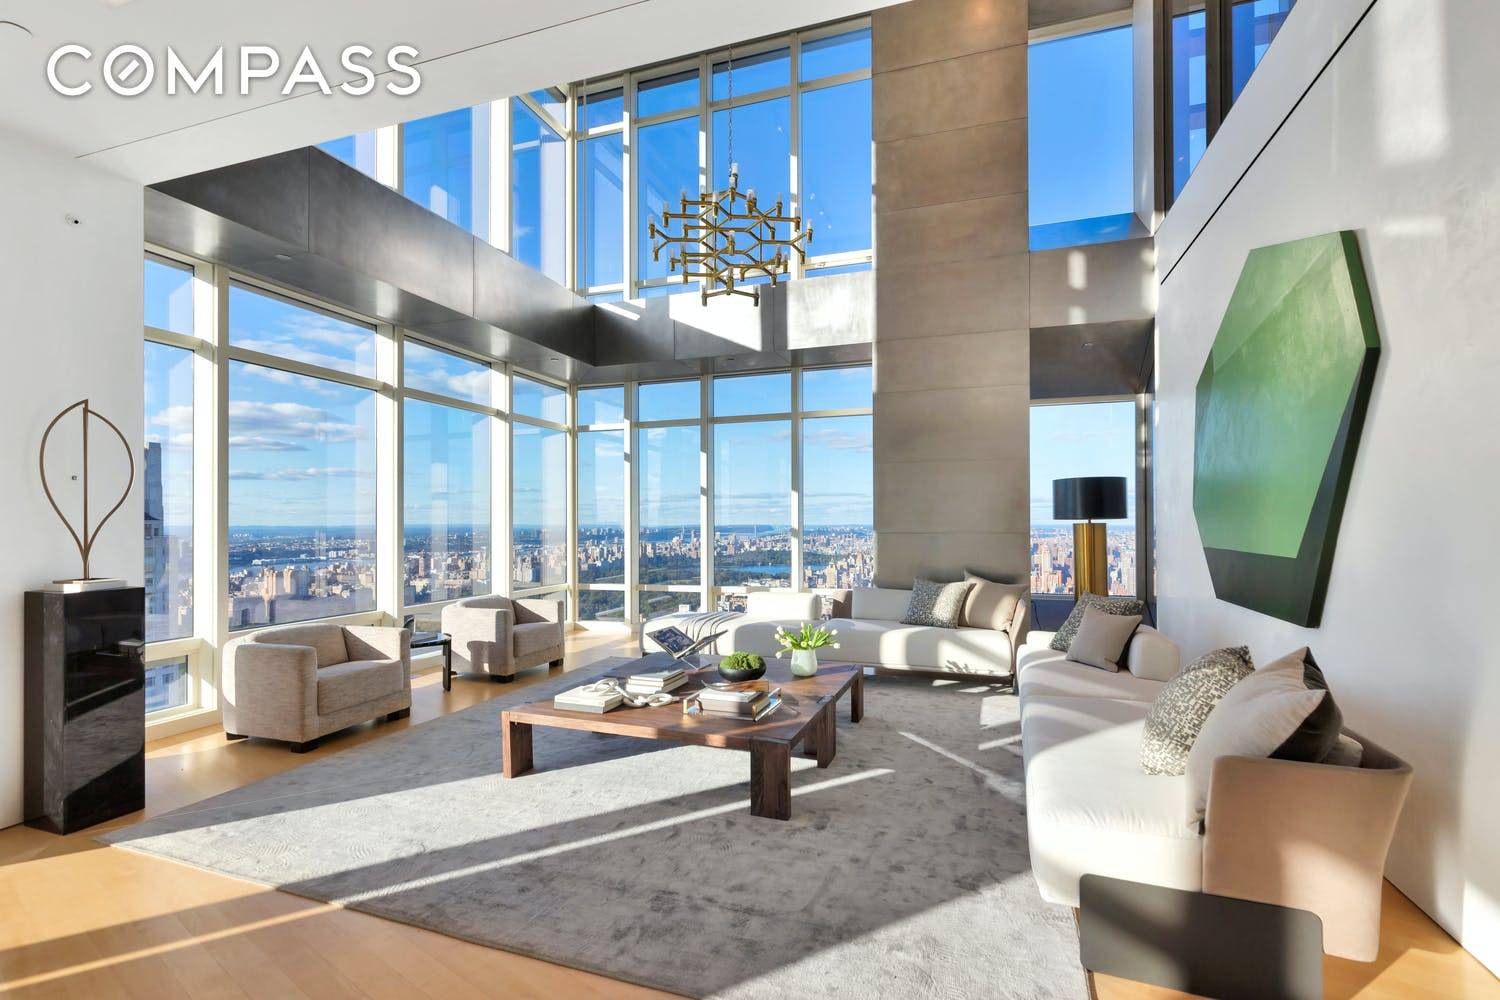 9, 000 SF Masterpiece Penthouse in the Sky Designed by Charles Gwathmey Soaring 700 feet above Manhattan lies the only duplex penthouse in the entire building PH51 52W, the crowned ...